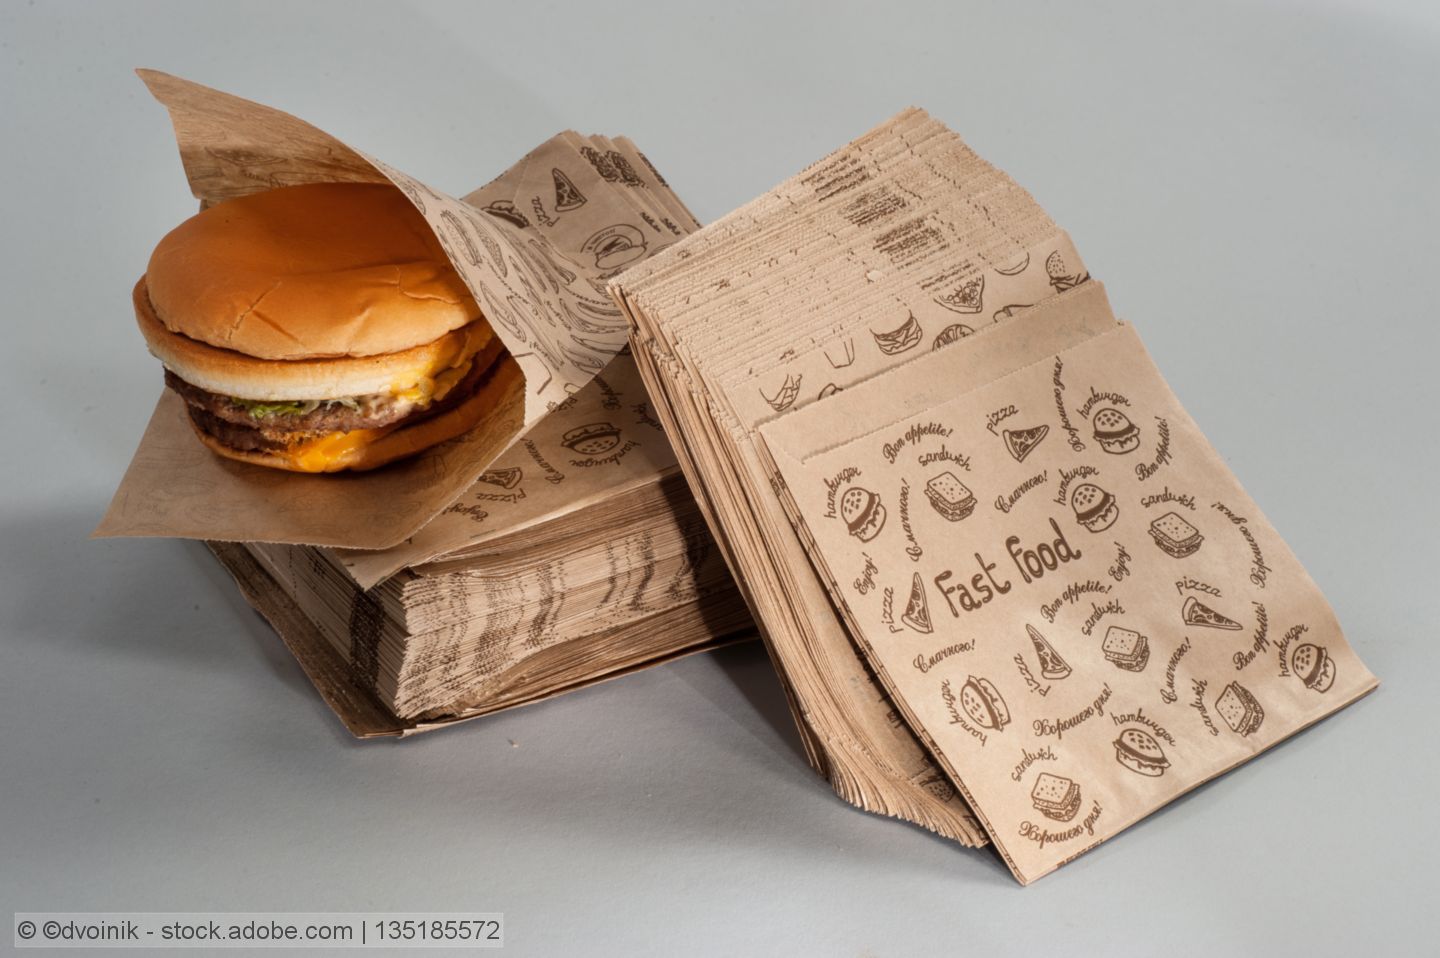 Paper-based packaging and napkins for takeaway food